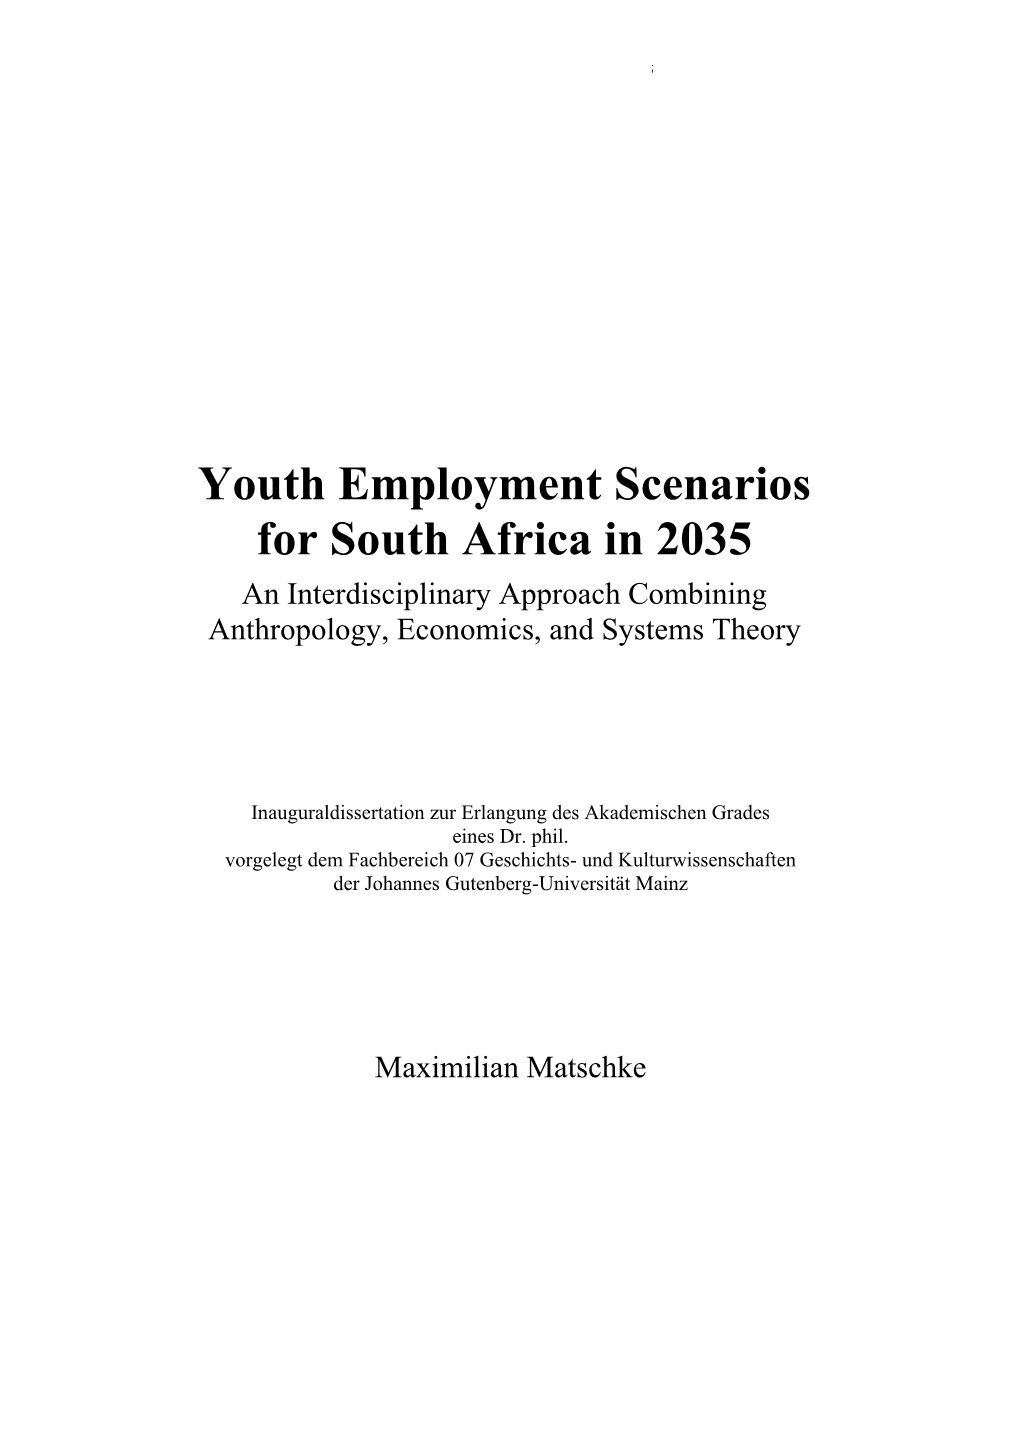 Youth Employment Scenarios for South Africa in 2035